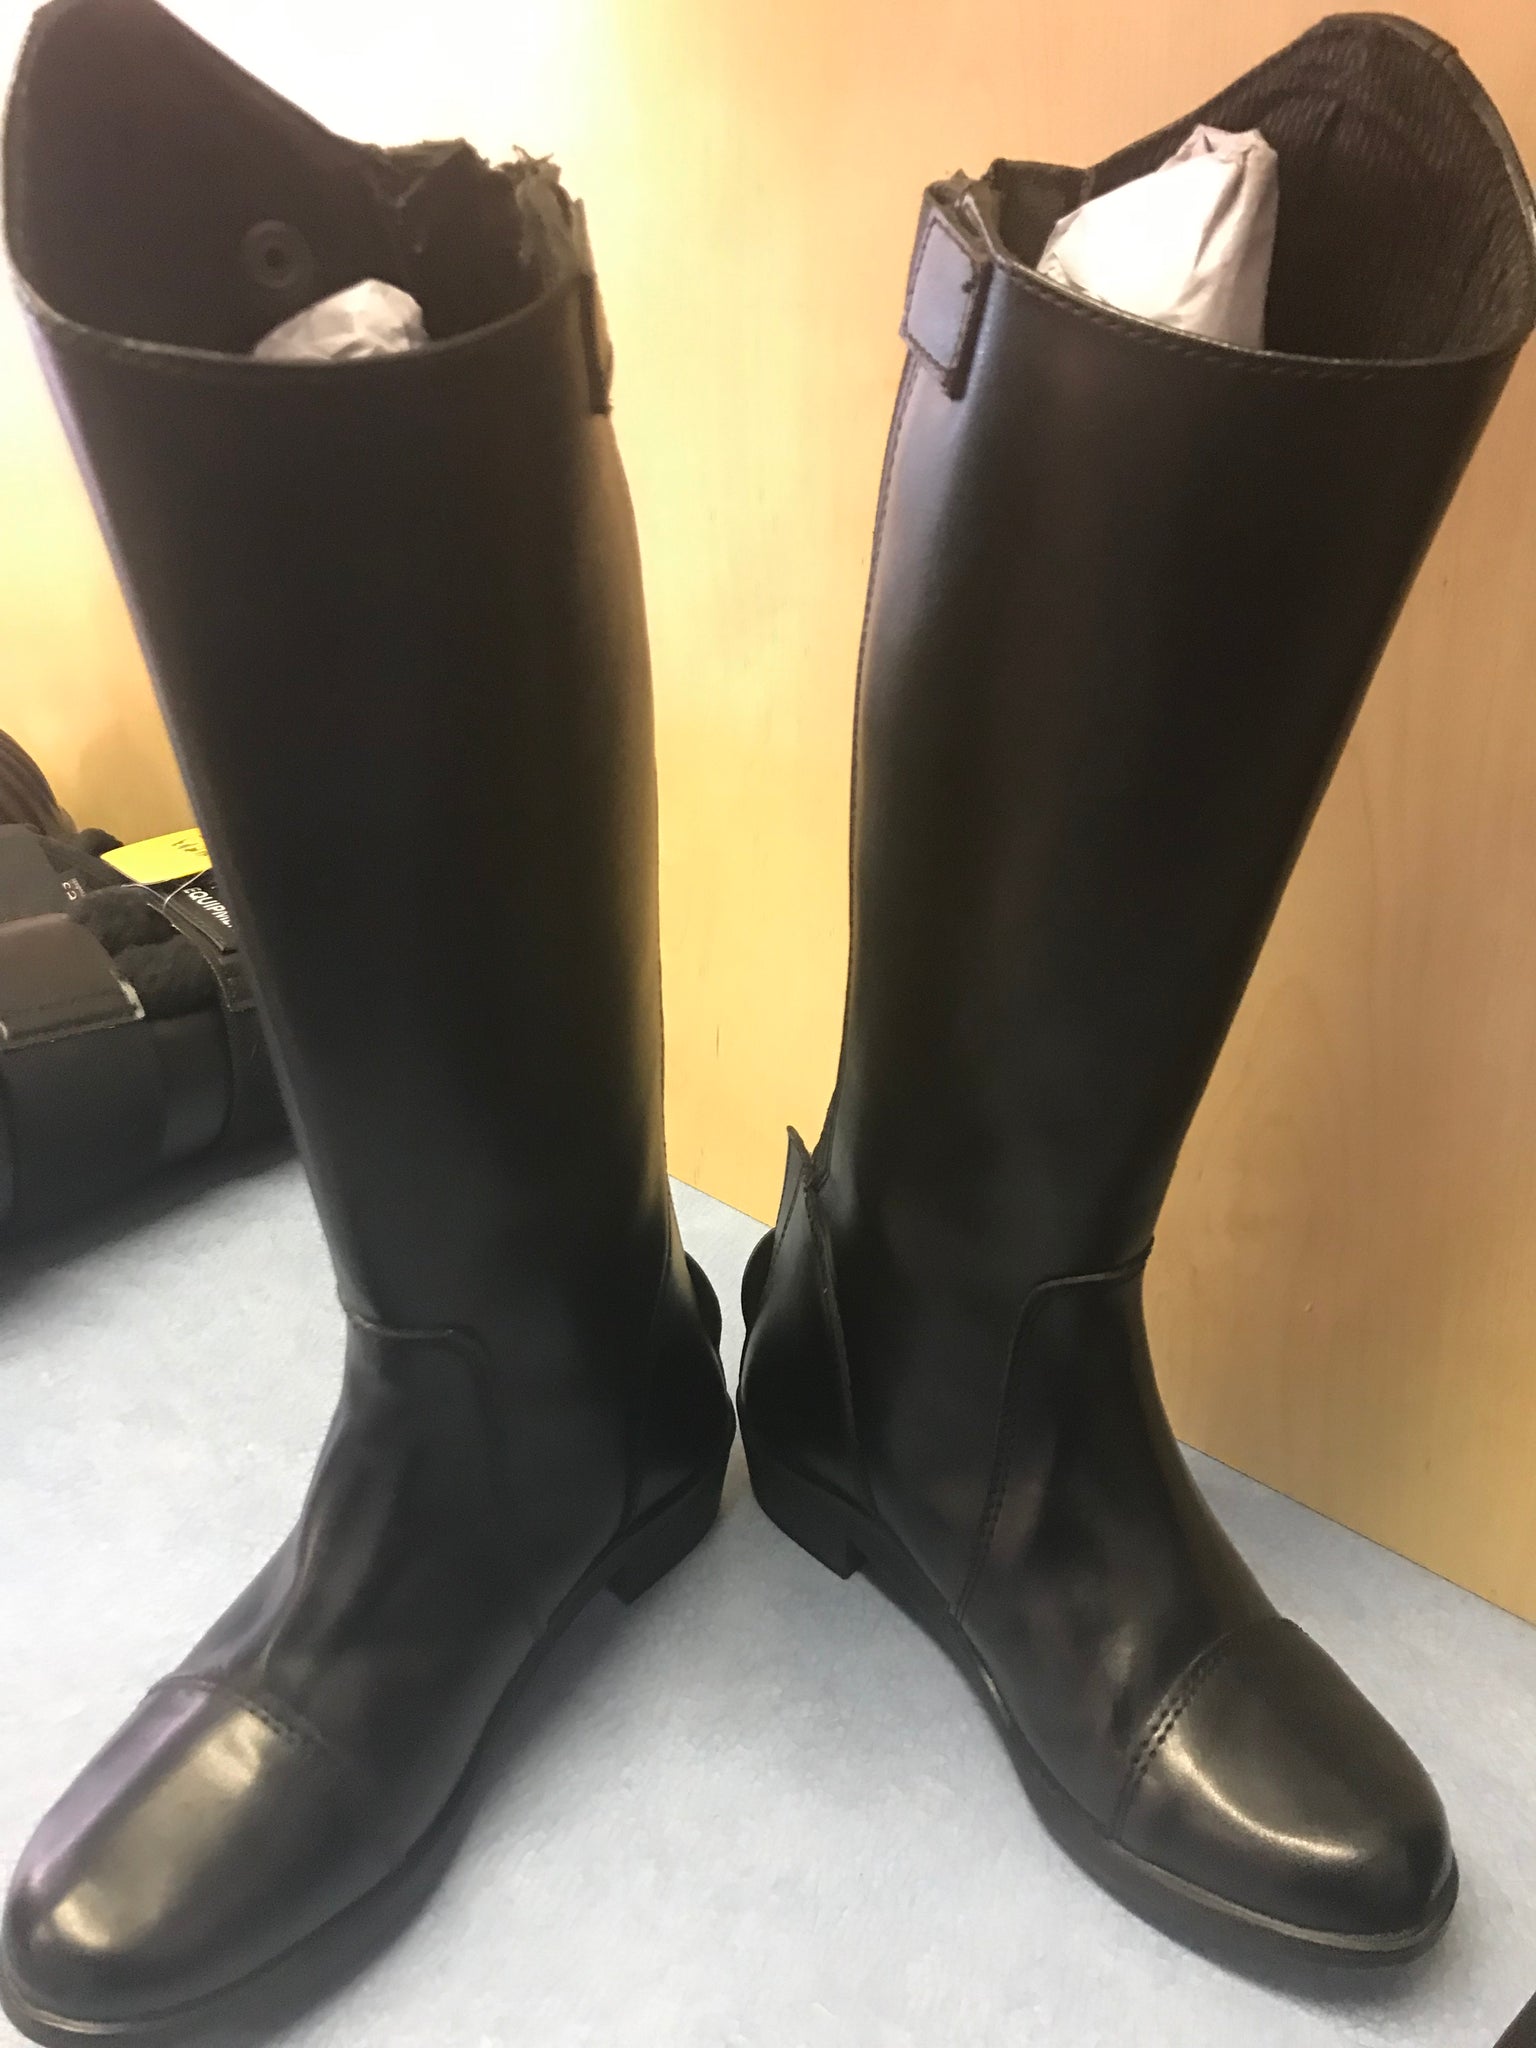 Long black riding boots size 13 (Second 